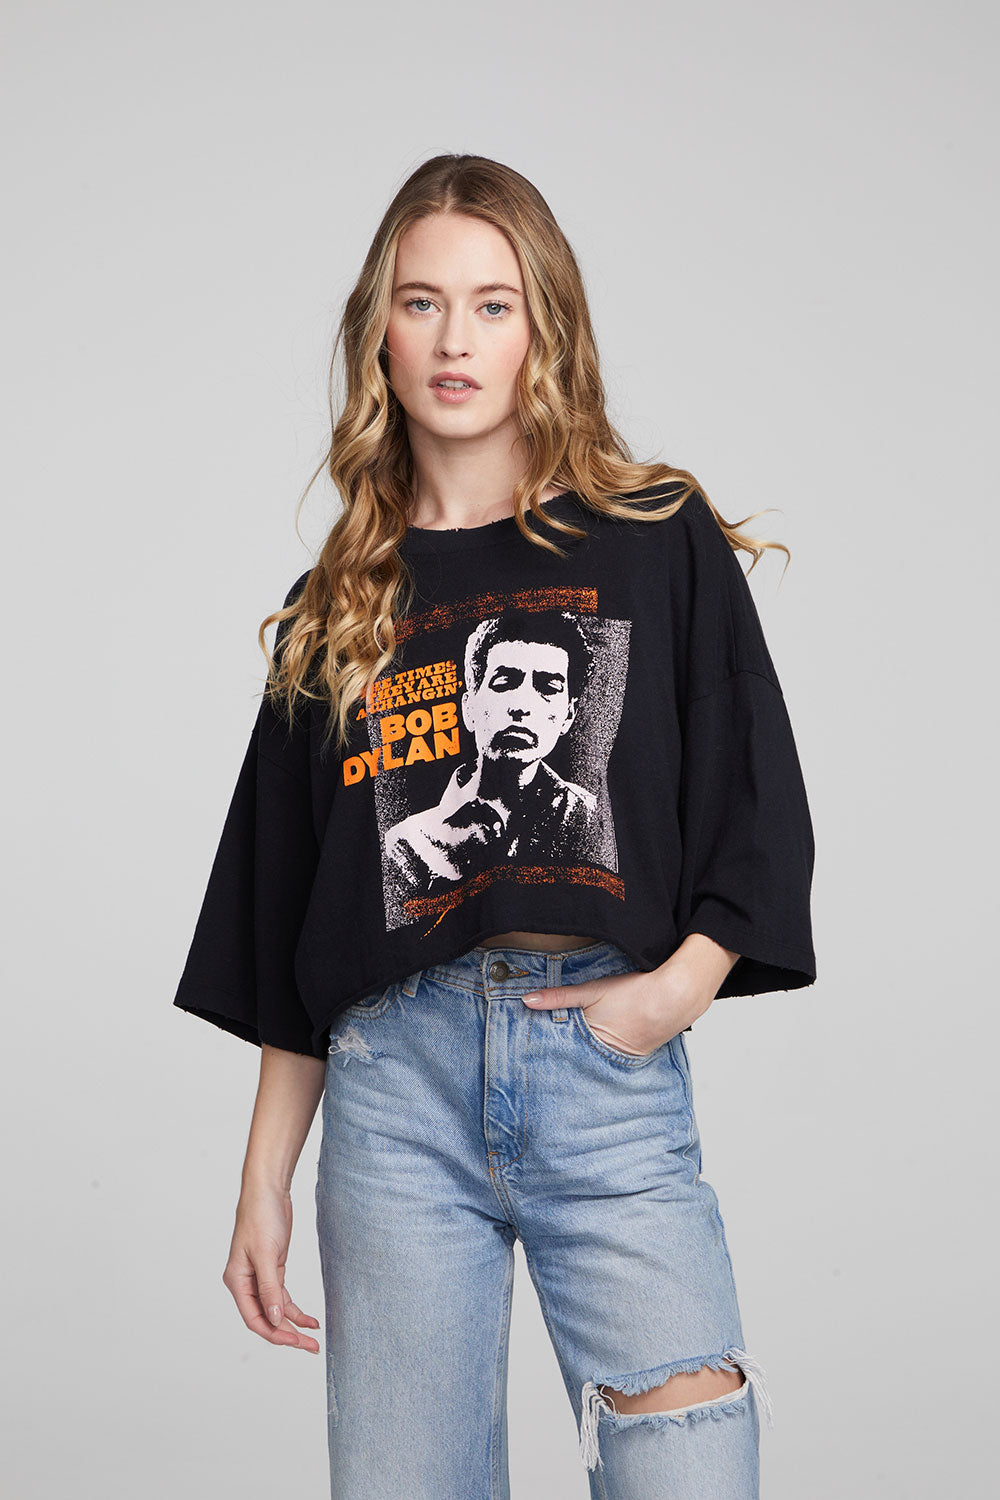 Bob Dylan The Times Long Sleeve WOMENS chaserbrand